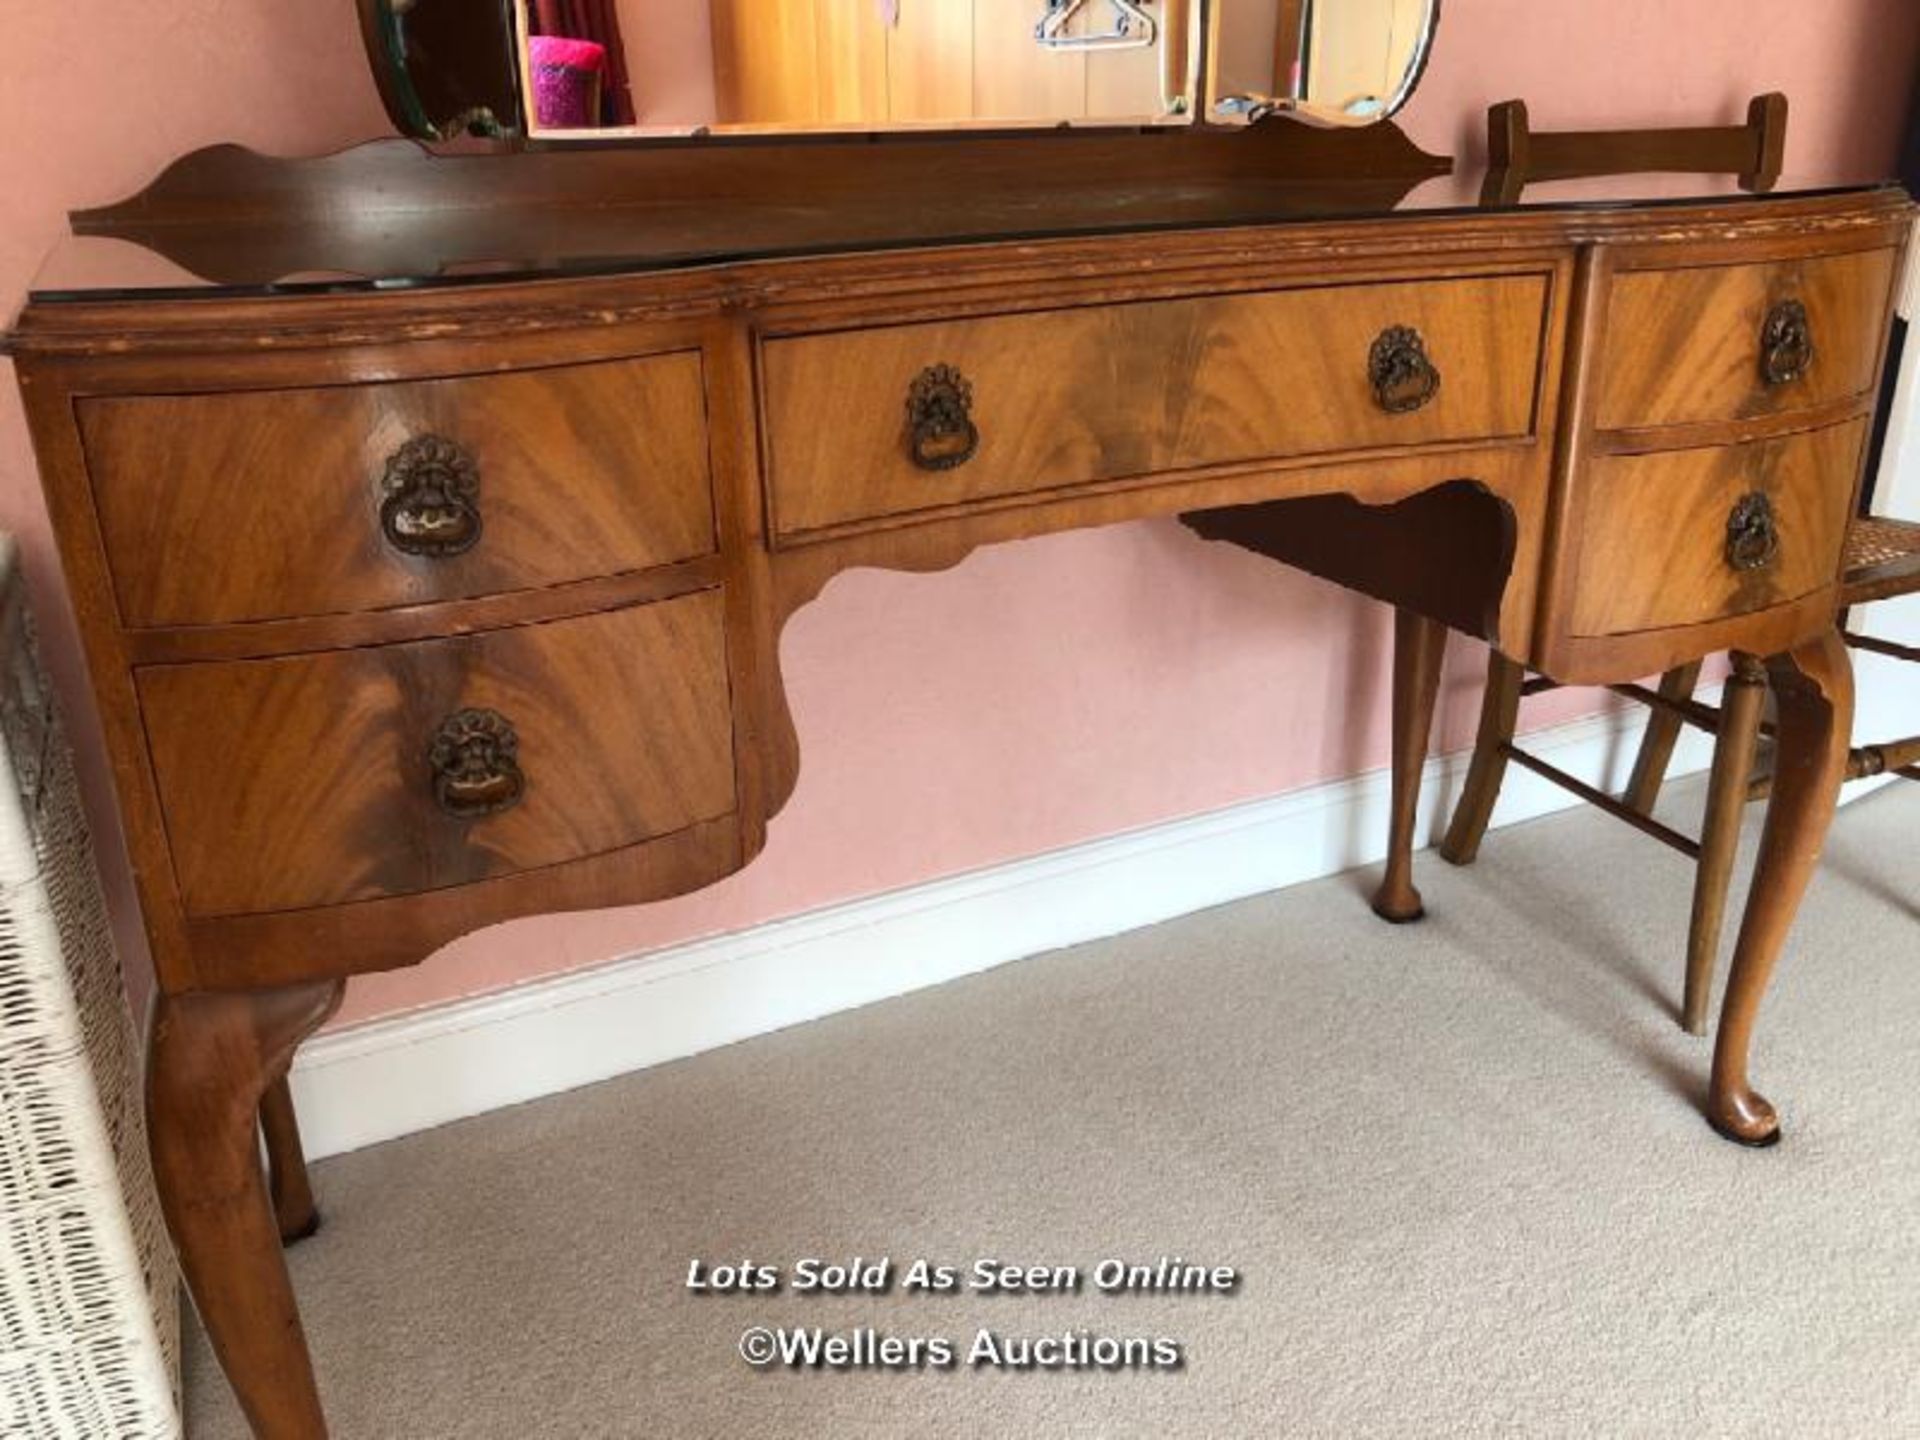 ANTIQUE FIVE DRAWER DRESSING TABLE WITH GLASS TOP AND FOLDING MIRROR, 117 X 78 X 50CM, MADE BY THE - Image 4 of 4